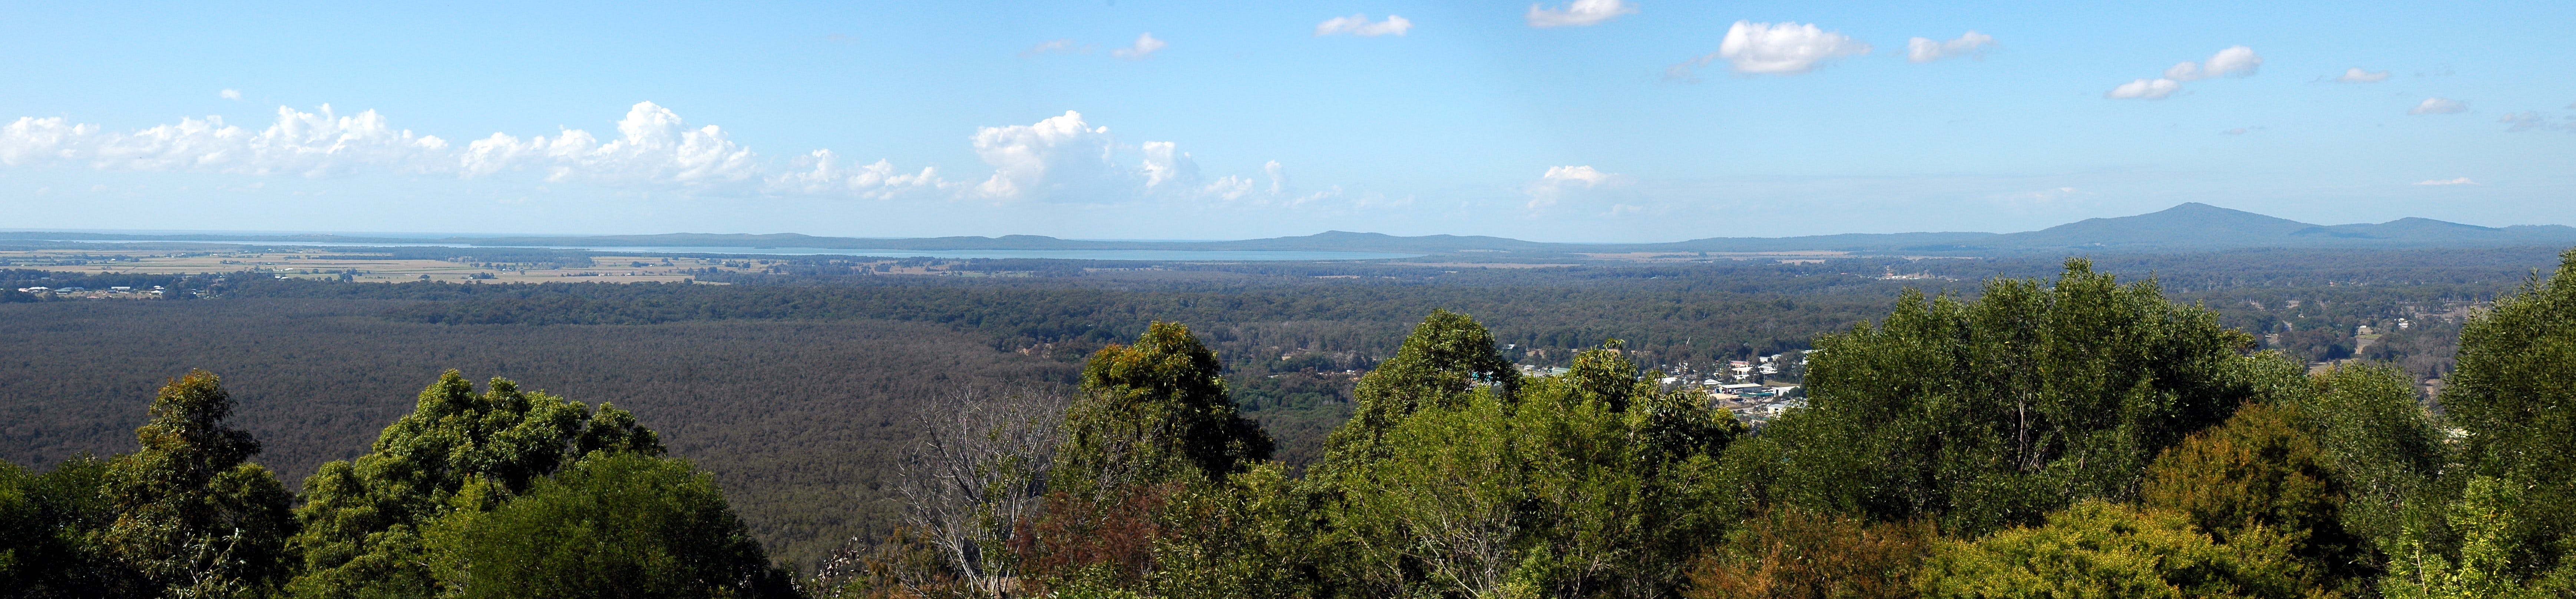 Maclean Lookout - Tourism Adelaide